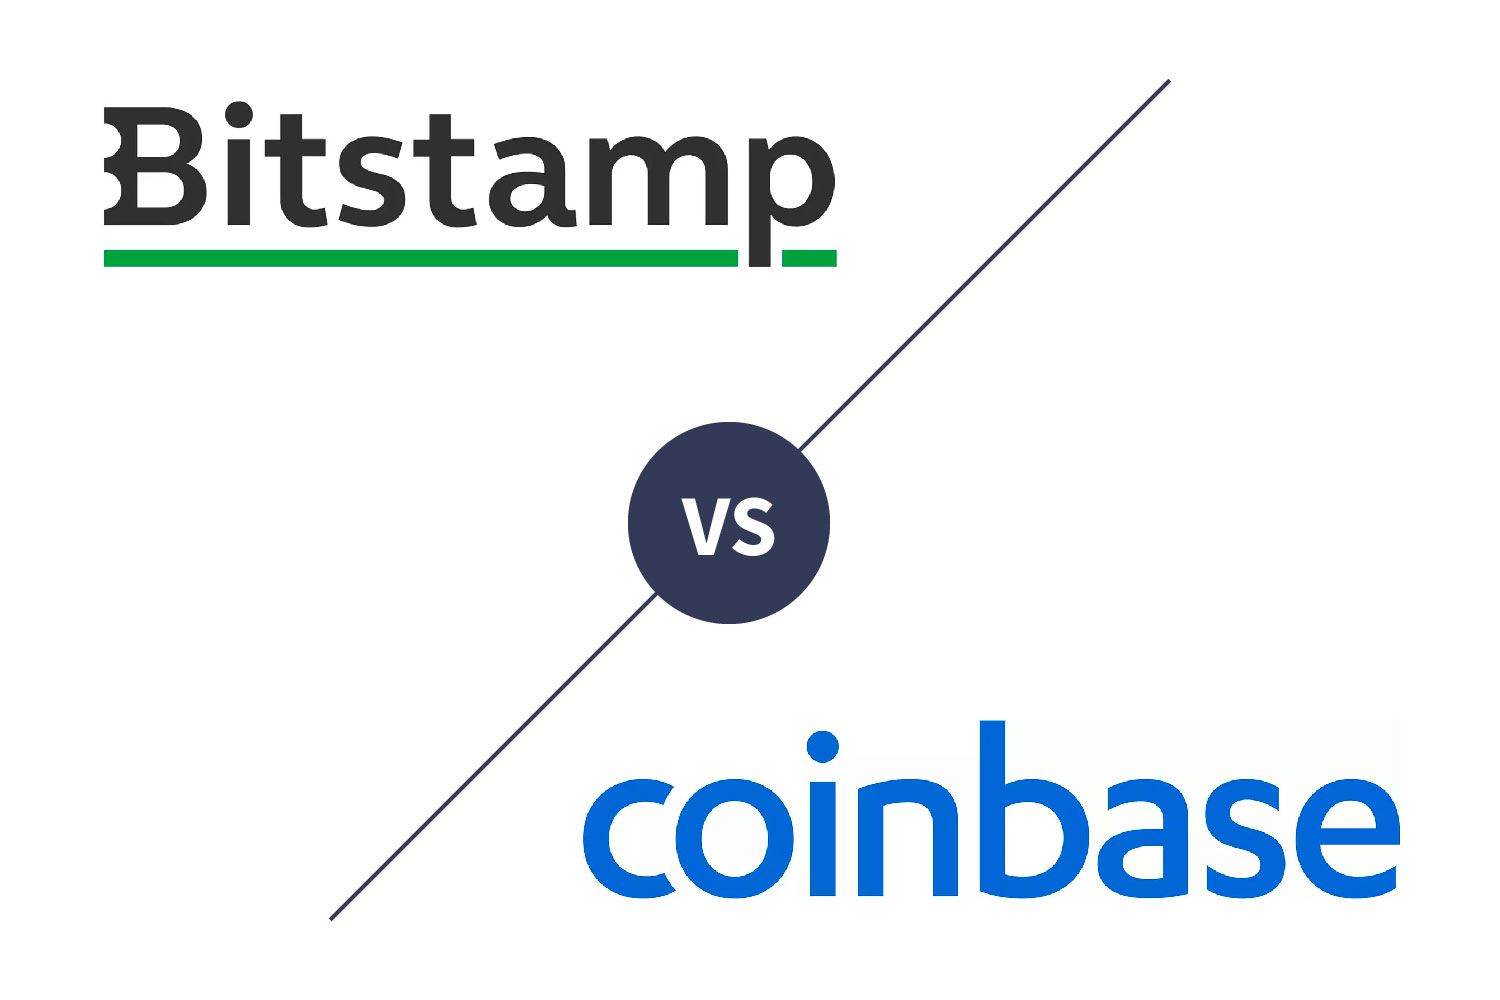 Coinbase Fees Explained [Complete Guide] - Crypto Pro